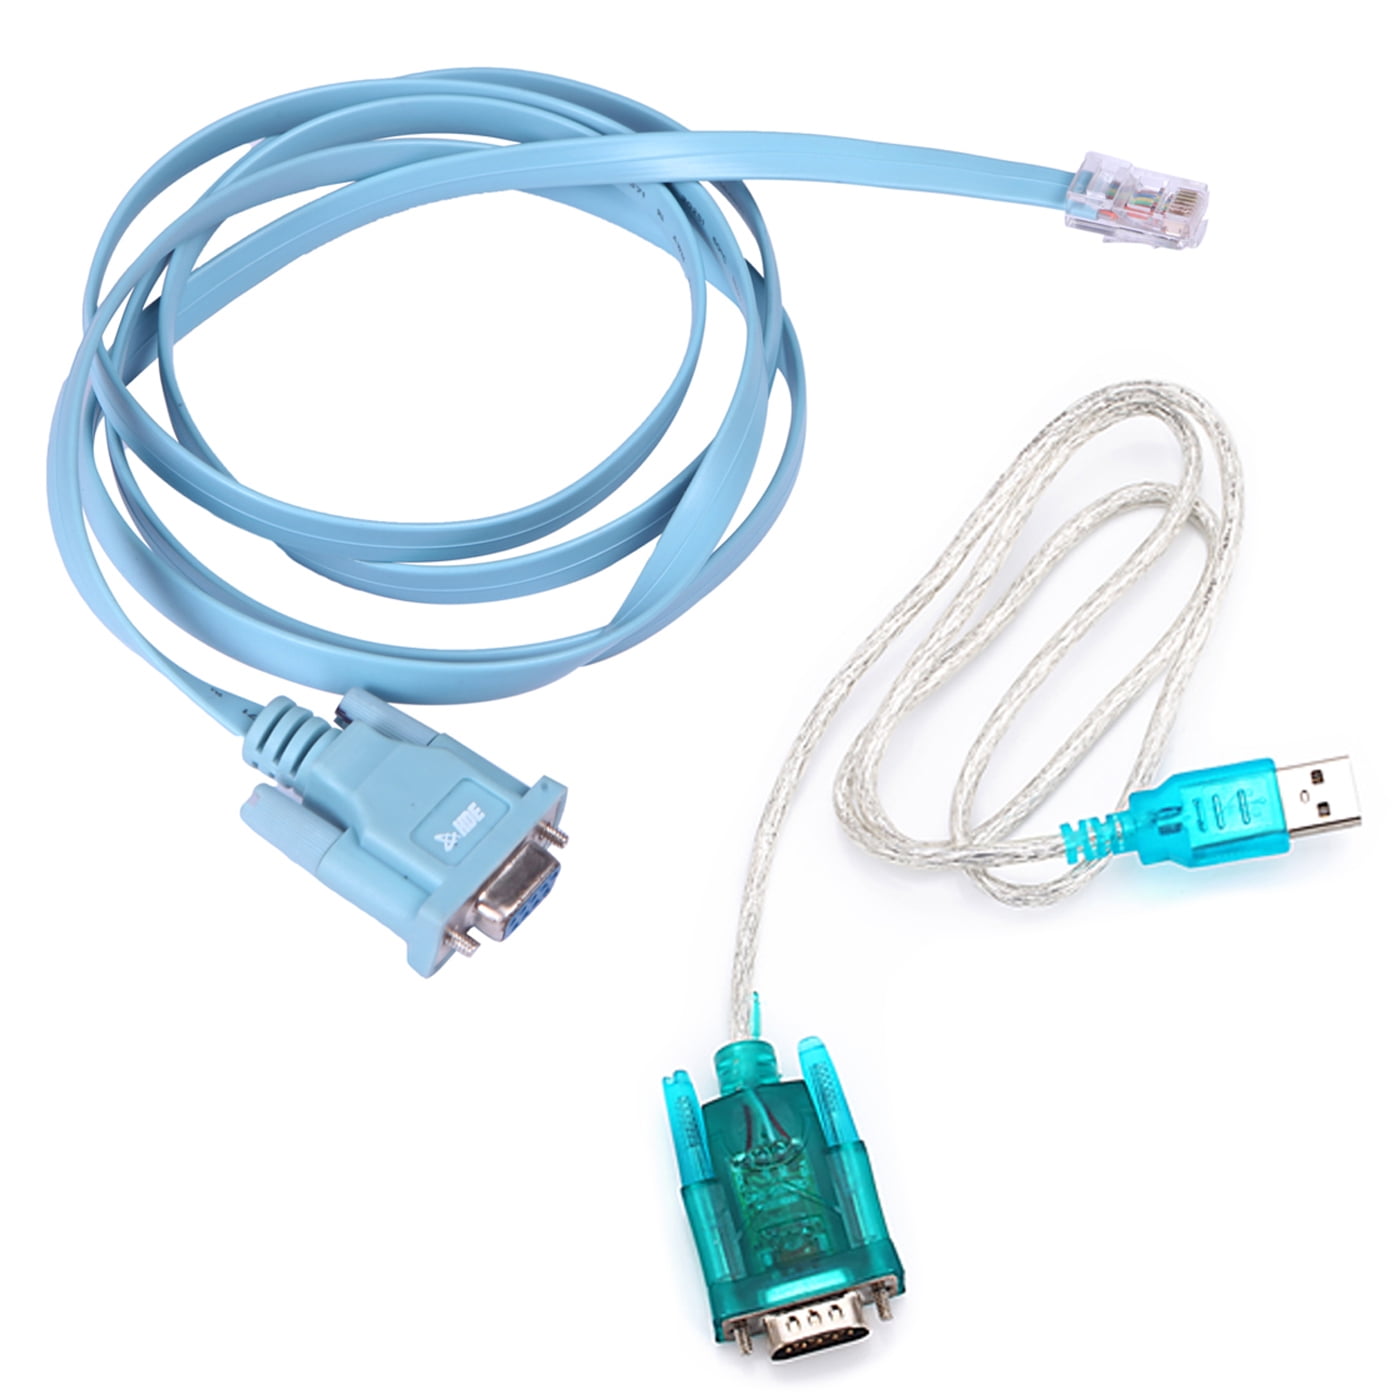 USB to Serial Interface RJ45 Cisco Console Adapter Cable Switches and Routers 